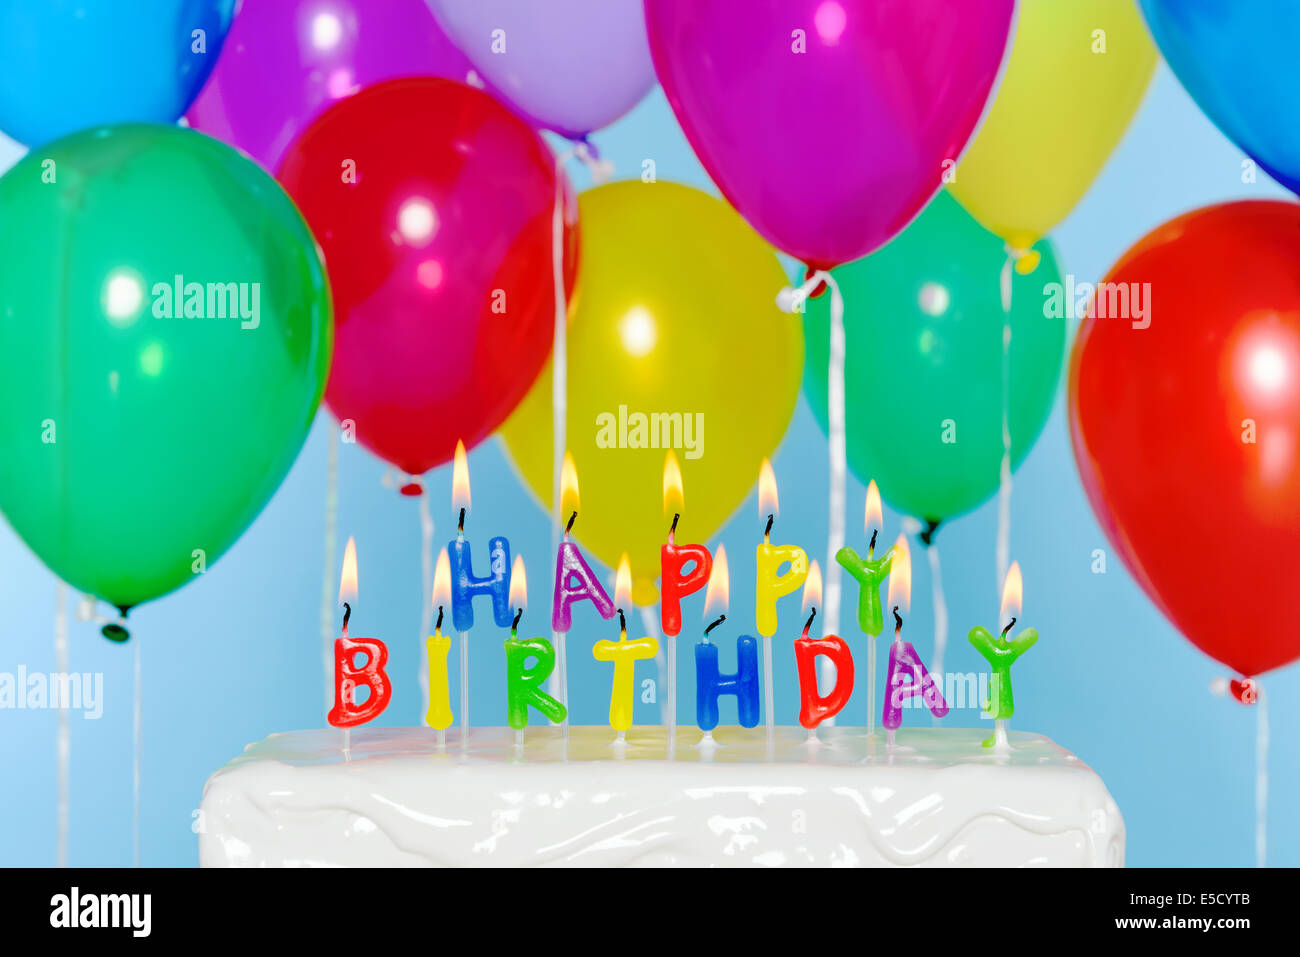 Happy Birthday candle letters on a cake with colourful balloons in the background. Stock Photo